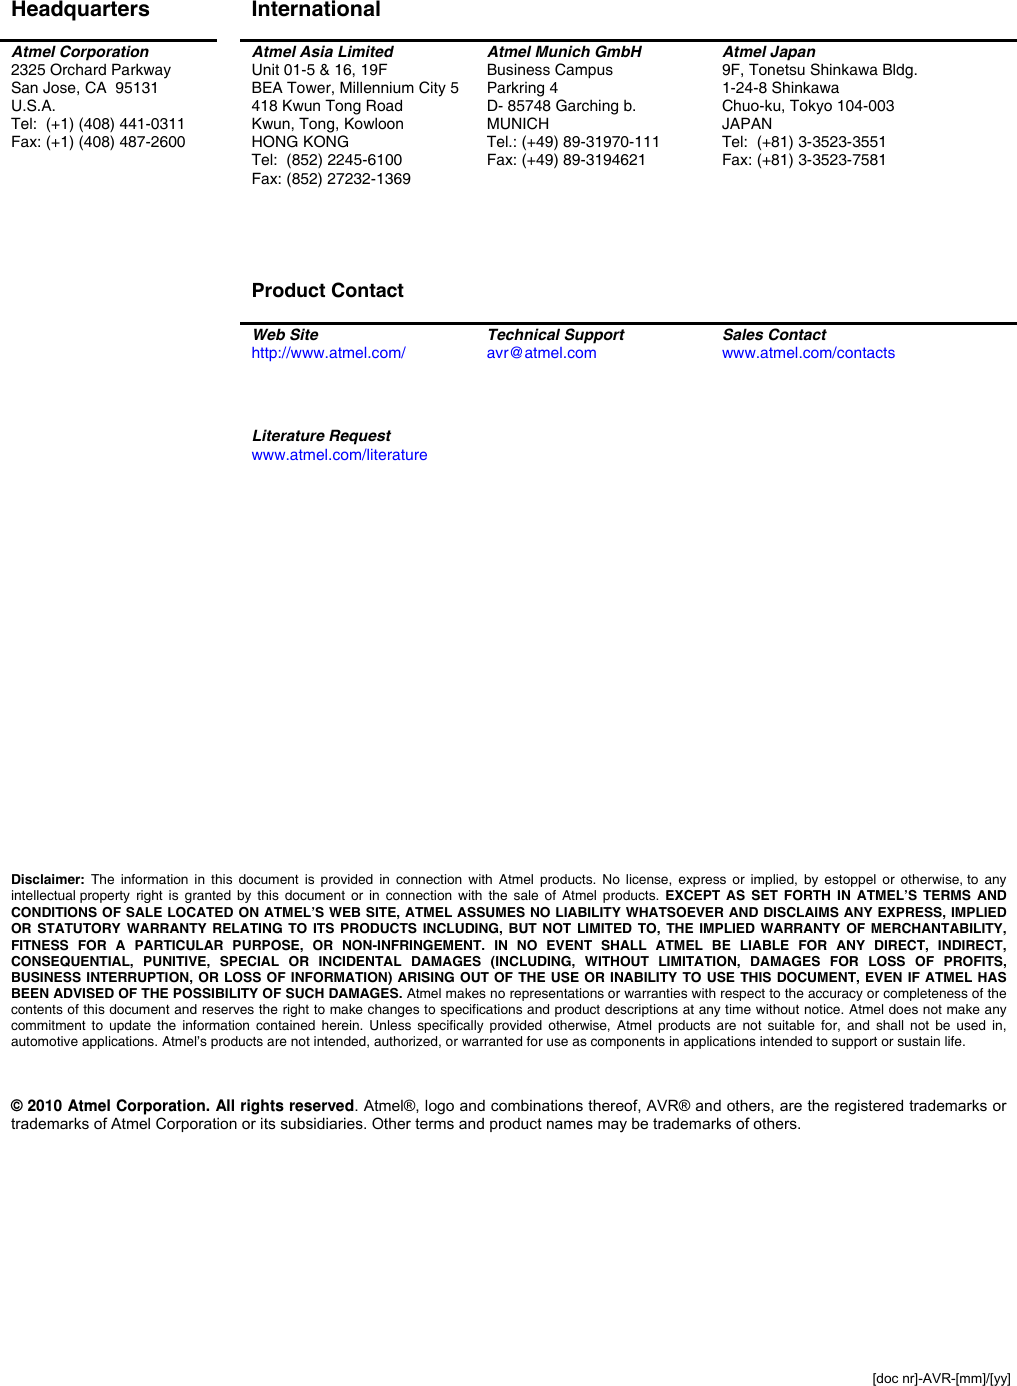  [doc nr]-AVR-[mm]/[yy]  Disclaimer Headquarters  International    Atmel Corporation 2325 Orchard Parkway San Jose, CA  95131 U.S.A. Tel:  (+1) (408) 441-0311 Fax: (+1) (408) 487-2600  Atmel Asia Limited Unit 01-5 &amp; 16, 19F BEA Tower, Millennium City 5 418 Kwun Tong Road Kwun, Tong, Kowloon HONG KONG Tel:  (852) 2245-6100 Fax: (852) 27232-1369     Product Contact  Atmel Munich GmbH Business Campus Parkring 4 D- 85748 Garching b.  MUNICH Tel.: (+49) 89-31970-111 Fax: (+49) 89-3194621 Atmel Japan 9F, Tonetsu Shinkawa Bldg. 1-24-8 Shinkawa Chuo-ku, Tokyo 104-003 JAPAN Tel:  (+81) 3-3523-3551 Fax: (+81) 3-3523-7581  Web Site http://www.atmel.com/  Technical Support avr@atmel.com  Sales Contact www.atmel.com/contacts     Literature Request www.atmel.com/literature                            Disclaimer: The information in this document is provided in connection with Atmel products. No license, express or implied, by estoppel or otherwise, to any intellectual property right is granted by this document or in connection with the sale of Atmel products. EXCEPT AS SET FORTH IN ATMEL’S TERMS AND CONDITIONS OF SALE LOCATED ON ATMEL’S WEB SITE, ATMEL ASSUMES NO LIABILITY WHATSOEVER AND DISCLAIMS ANY EXPRESS, IMPLIED OR STATUTORY WARRANTY RELATING TO ITS PRODUCTS INCLUDING, BUT NOT LIMITED TO, THE IMPLIED WARRANTY OF MERCHANTABILITY, FITNESS FOR A PARTICULAR PURPOSE, OR NON-INFRINGEMENT. IN NO EVENT SHALL ATMEL BE LIABLE FOR ANY DIRECT, INDIRECT, CONSEQUENTIAL, PUNITIVE, SPECIAL OR INCIDENTAL DAMAGES (INCLUDING, WITHOUT LIMITATION, DAMAGES FOR LOSS OF PROFITS, BUSINESS INTERRUPTION, OR LOSS OF INFORMATION) ARISING OUT OF THE USE OR INABILITY TO USE THIS DOCUMENT, EVEN IF ATMEL HAS BEEN ADVISED OF THE POSSIBILITY OF SUCH DAMAGES. Atmel makes no representations or warranties with respect to the accuracy or completeness of the contents of this document and reserves the right to make changes to specifications and product descriptions at any time without notice. Atmel does not make any commitment to update the information contained herein. Unless specifically provided otherwise, Atmel products are not suitable for, and shall not be used in, automotive applications. Atmel’s products are not intended, authorized, or warranted for use as components in applications intended to support or sustain life.    © 2010 Atmel Corporation. All rights reserved. Atmel®, logo and combinations thereof, AVR® and others, are the registered trademarks or trademarks of Atmel Corporation or its subsidiaries. Other terms and product names may be trademarks of others.   